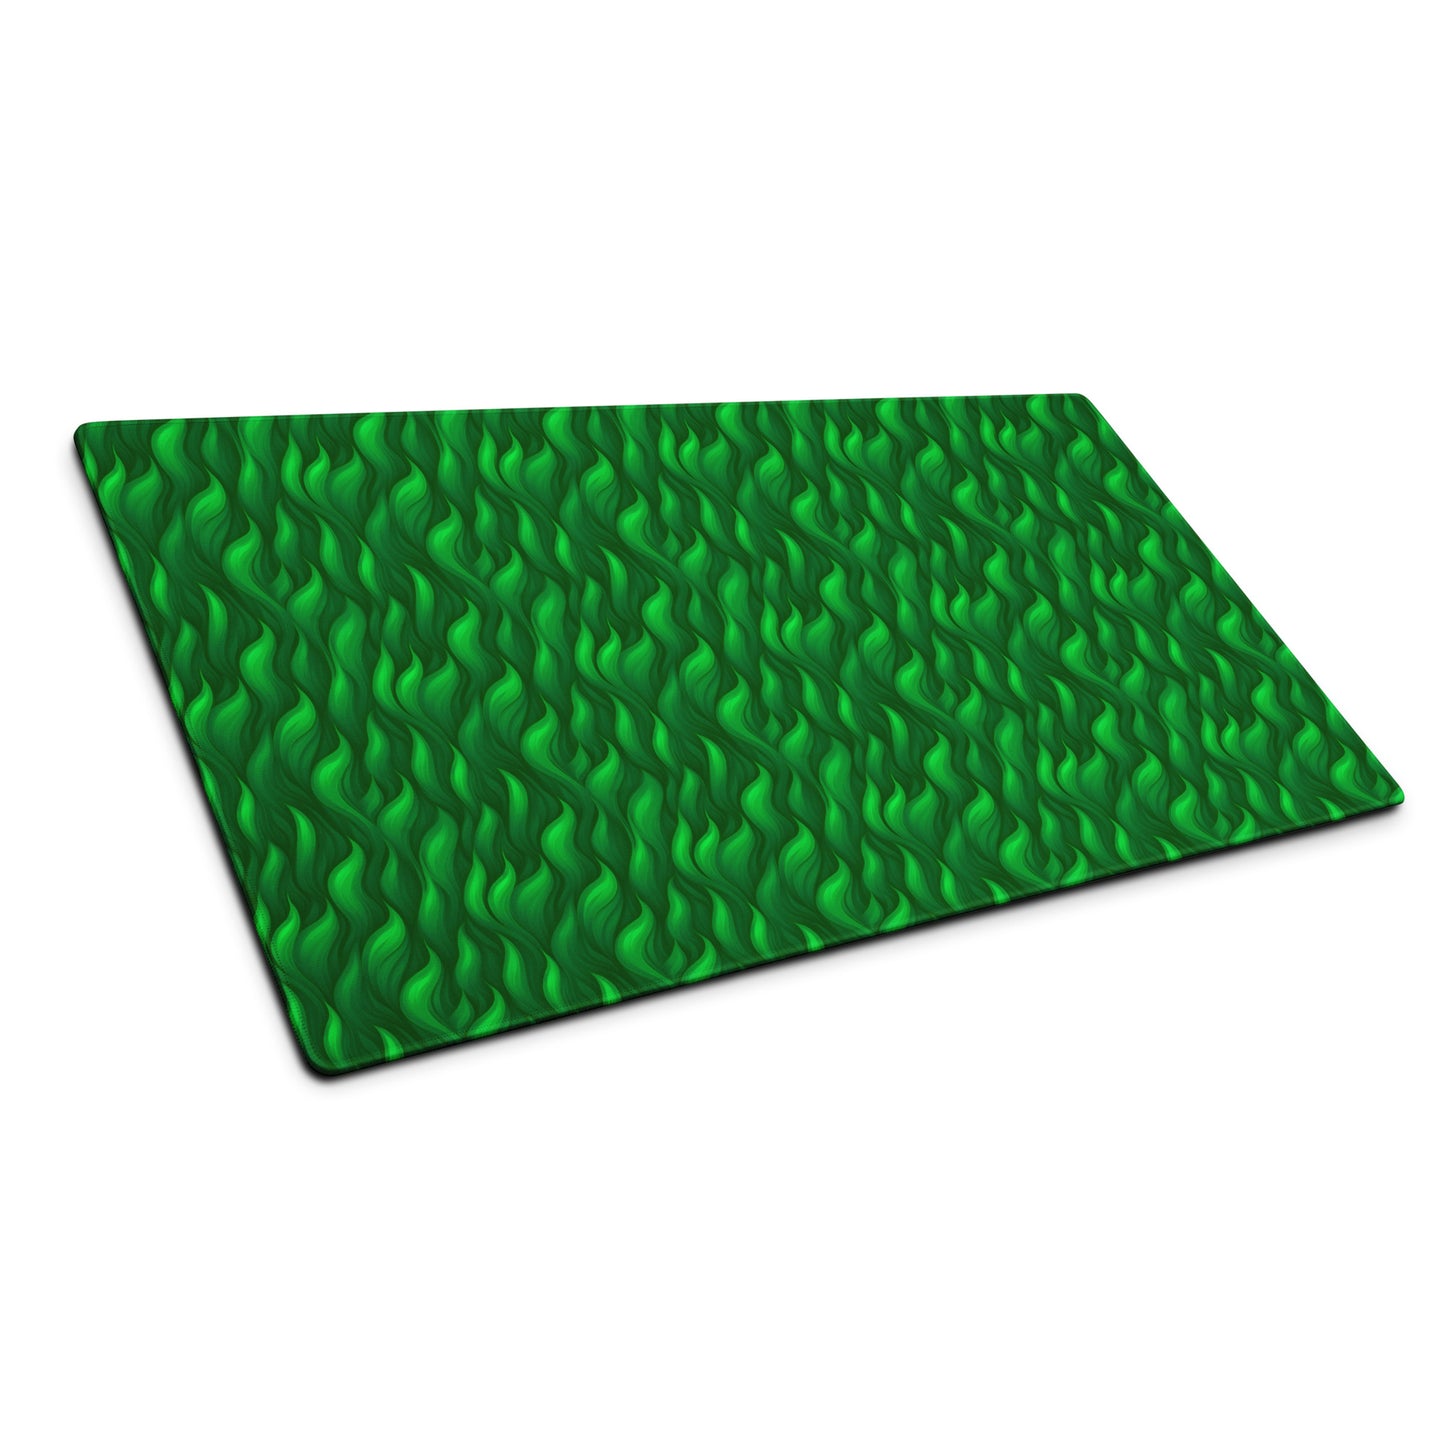 A 36" x 18" desk pad with a wavy flame pattern on it shown at an angle. Green in color.